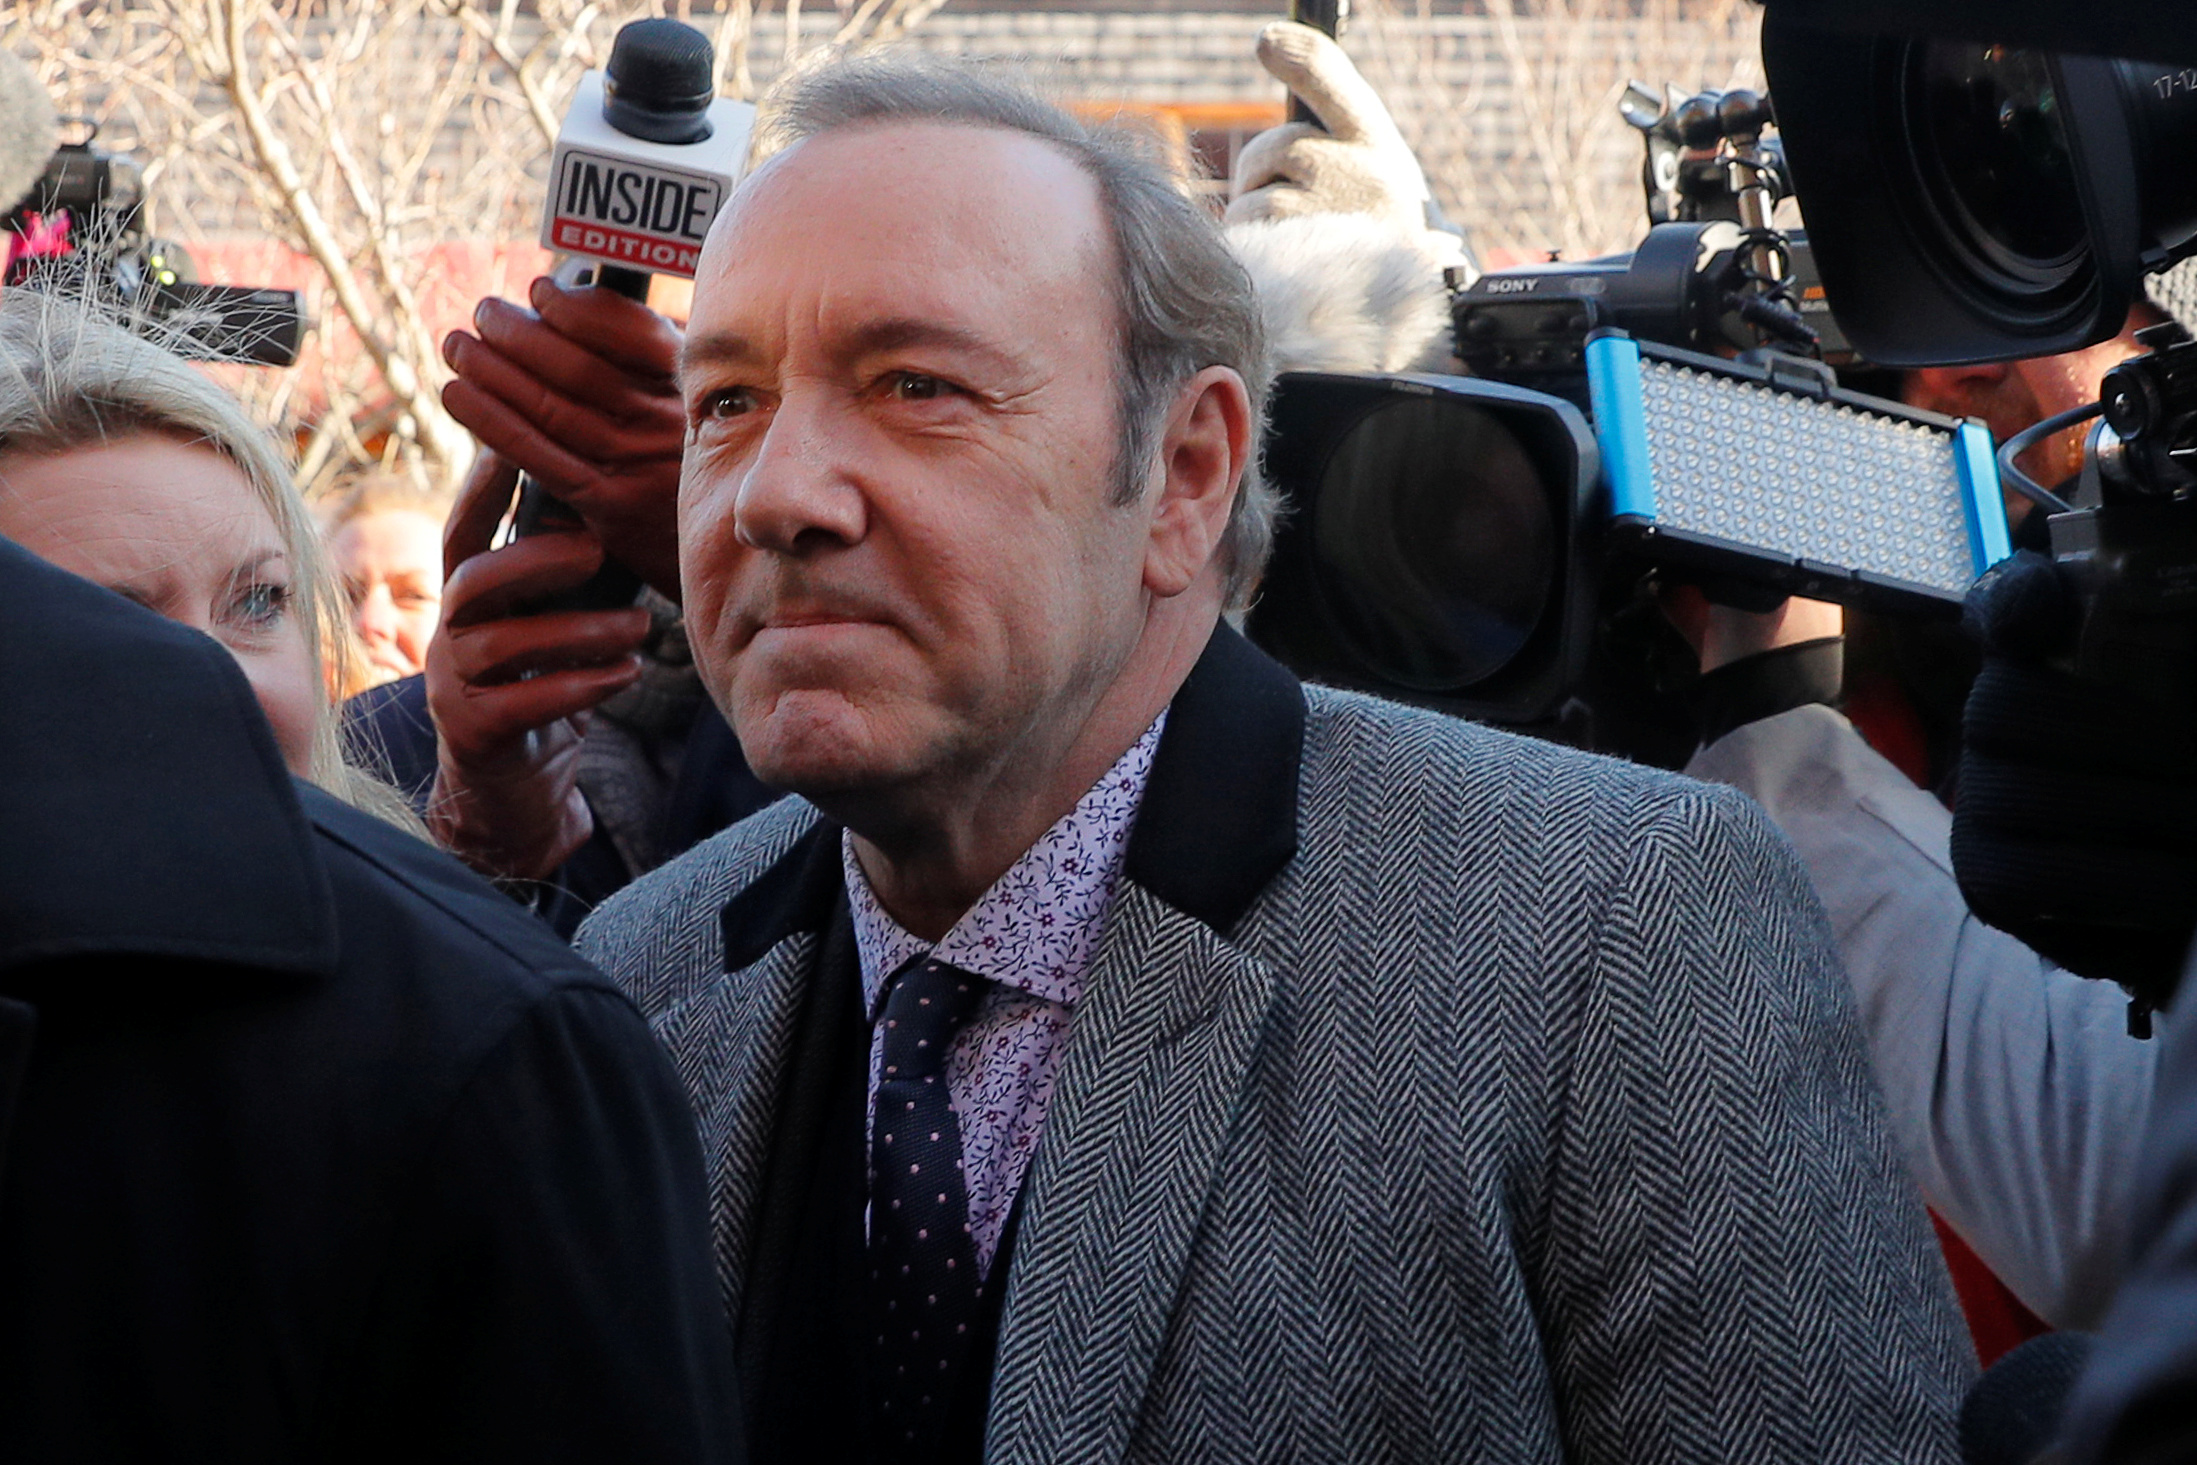 Actor Kevin Spacey arrives to face a sexual assault charge at Nantucket District Court in Nantucket, Massachusetts, U.S., January 7, 2019. REUTERS/Brian Snyder - 